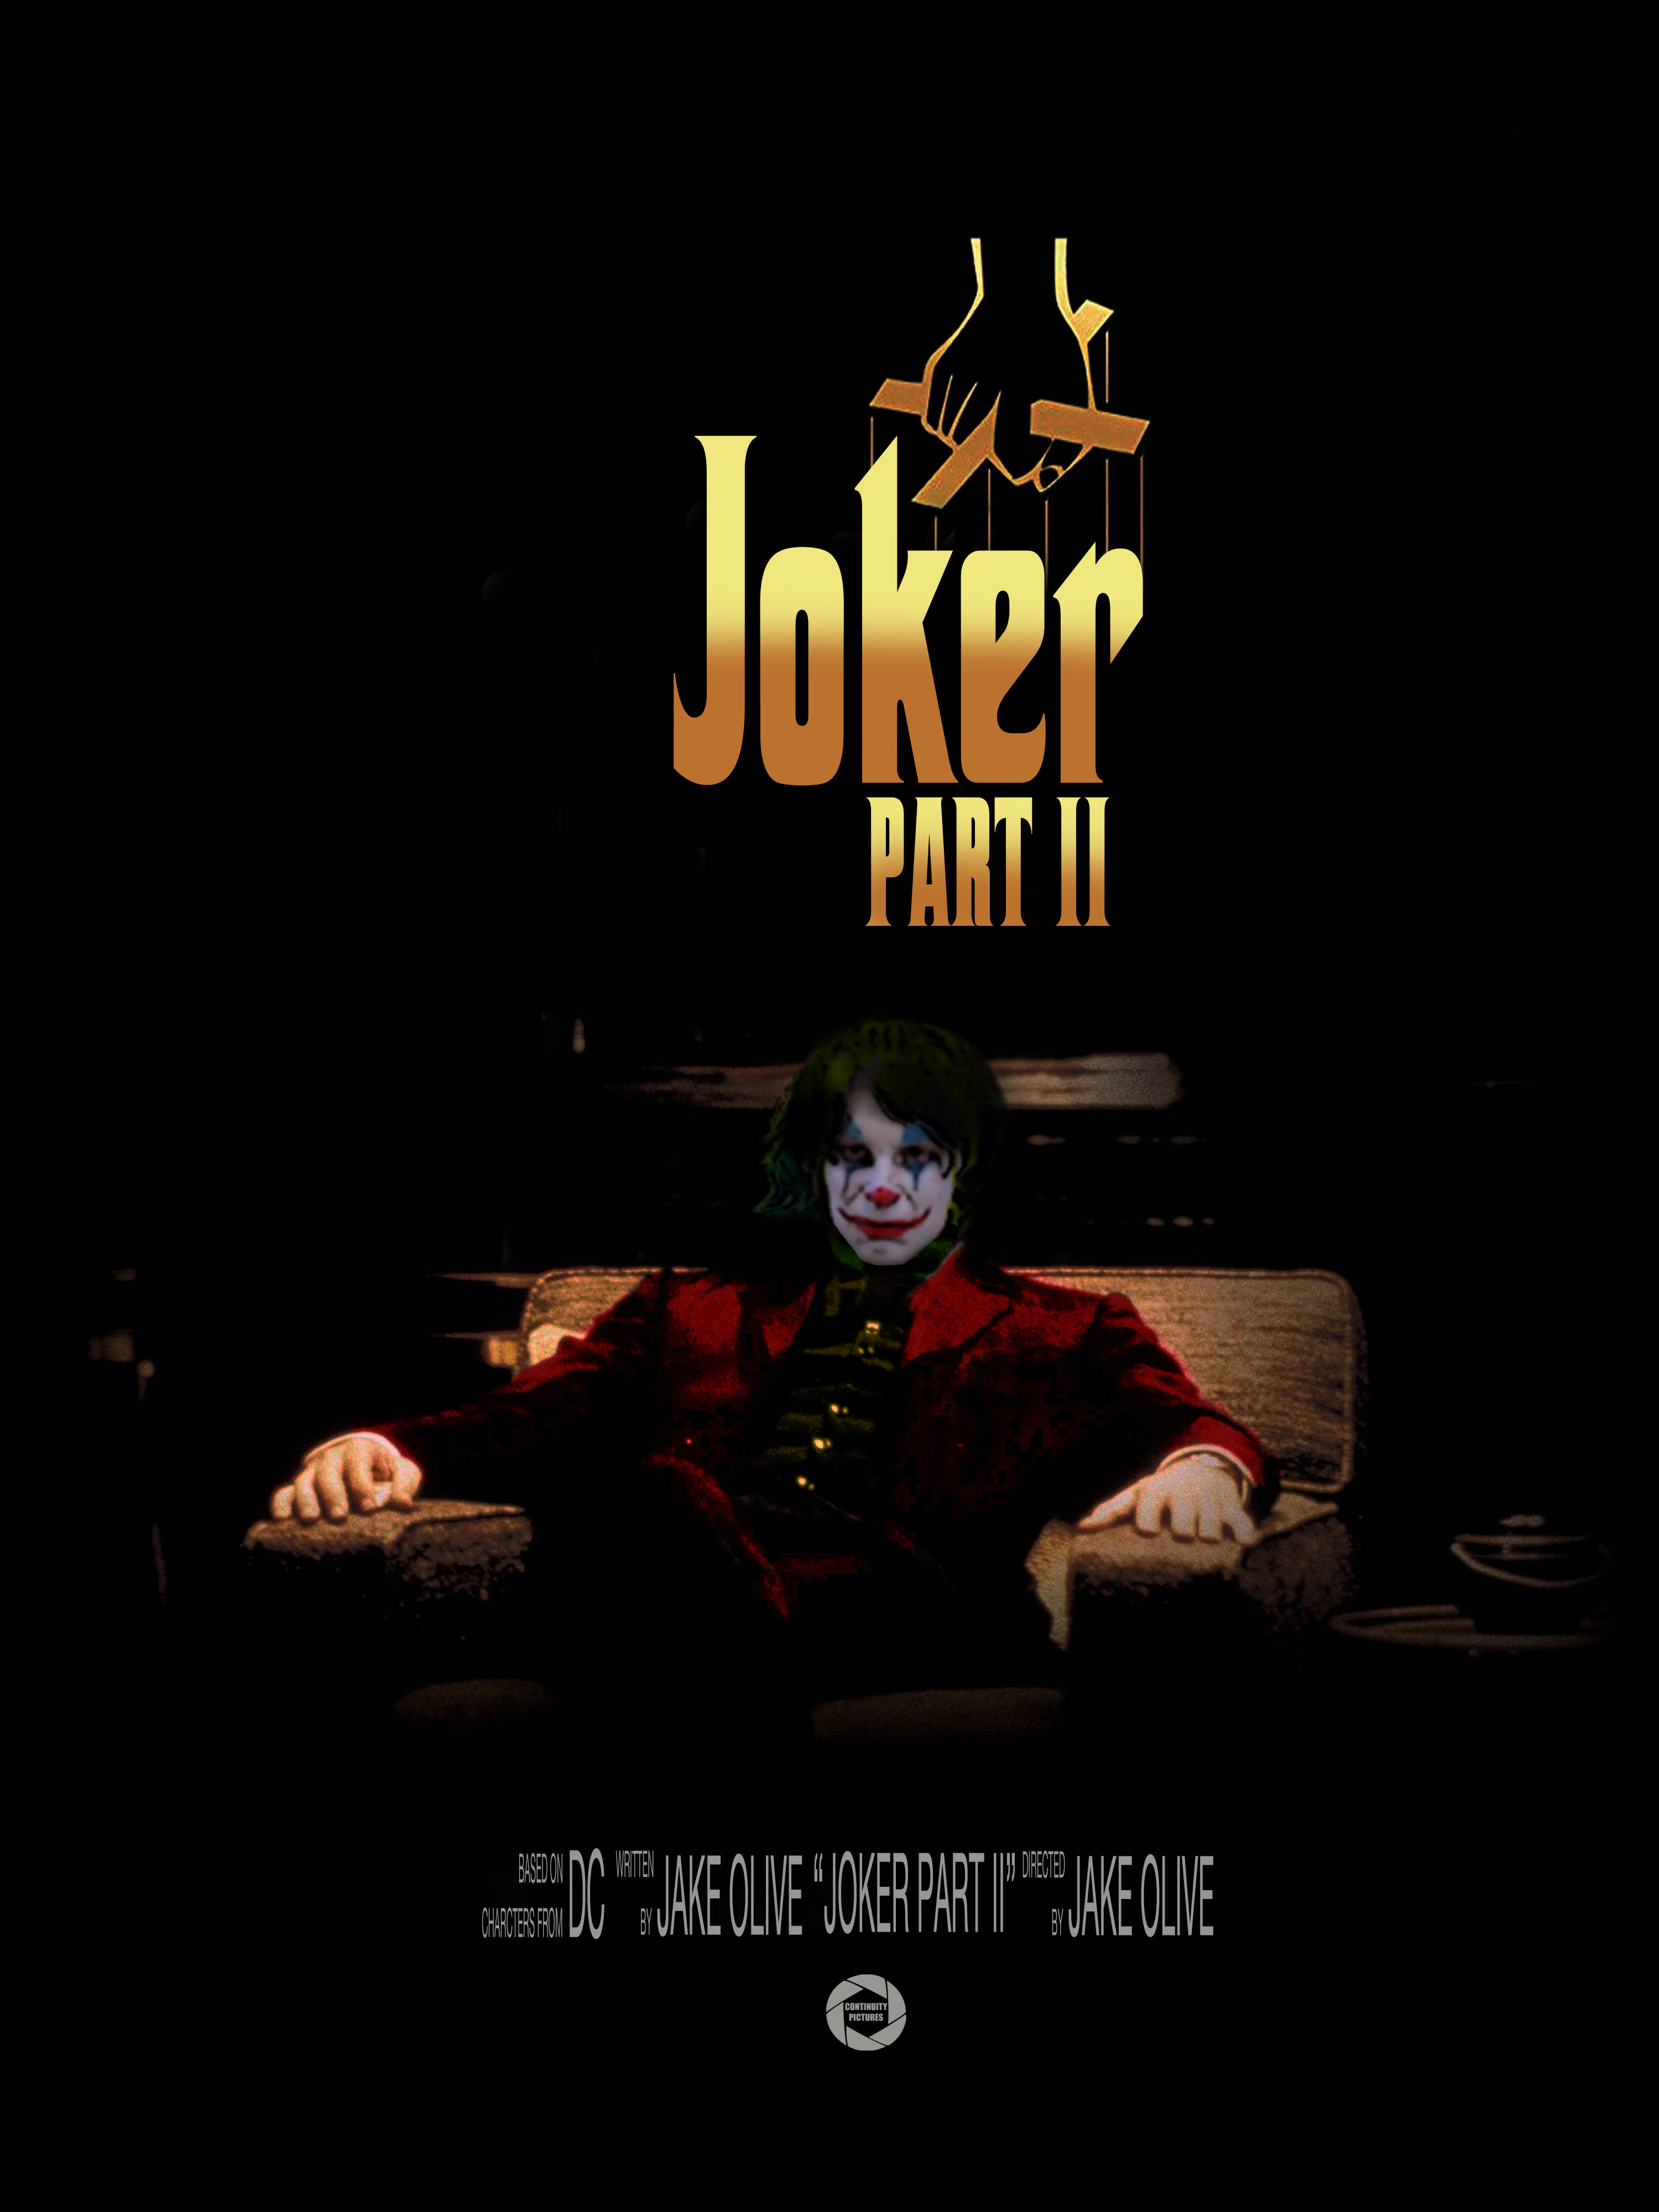 andy jury recommends Joker Tamil Movie Download